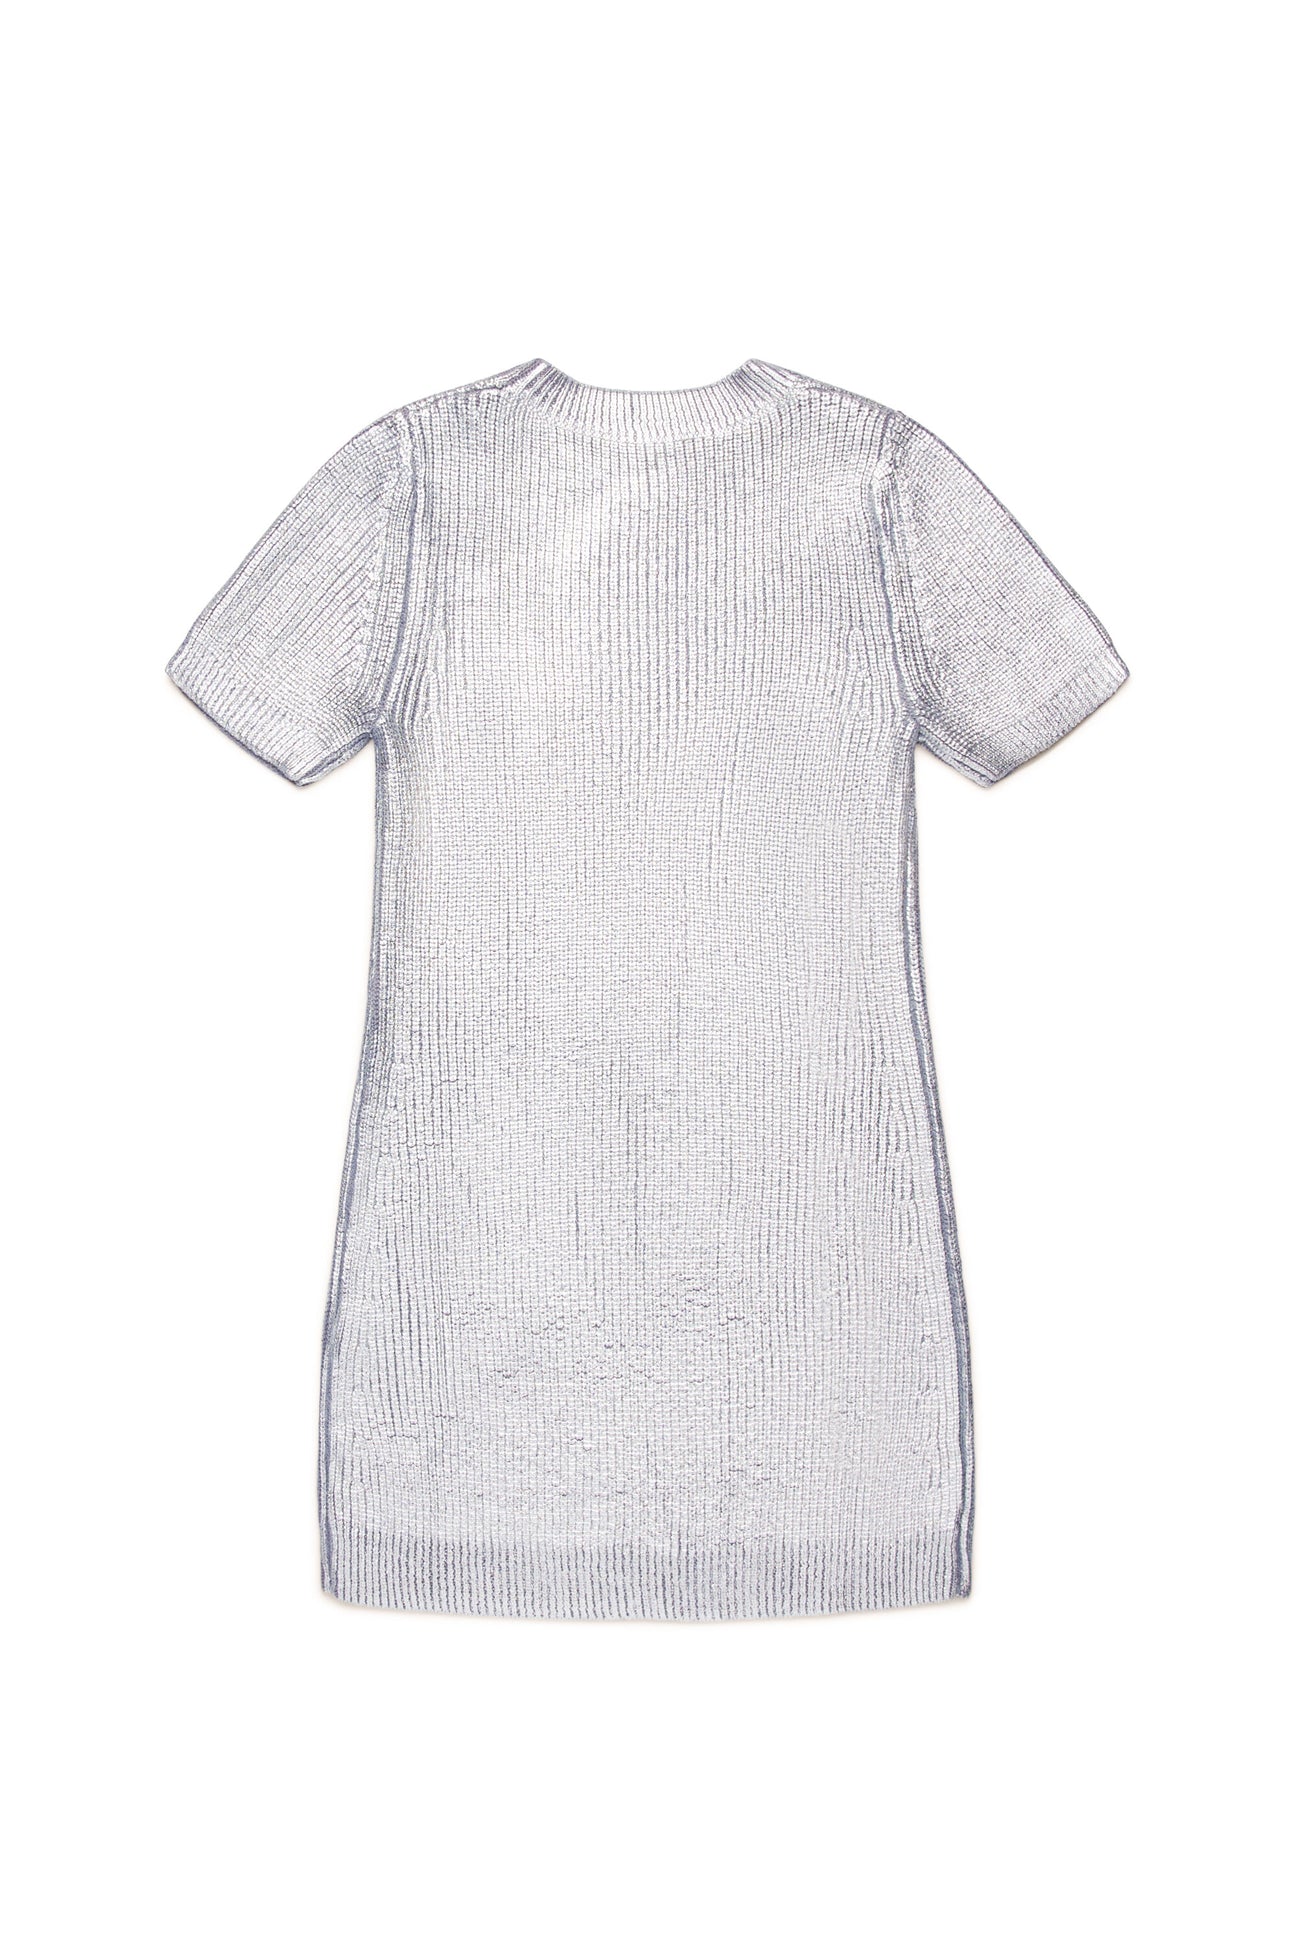 All-over silver mylar ribbed dress All-over silver mylar ribbed dress